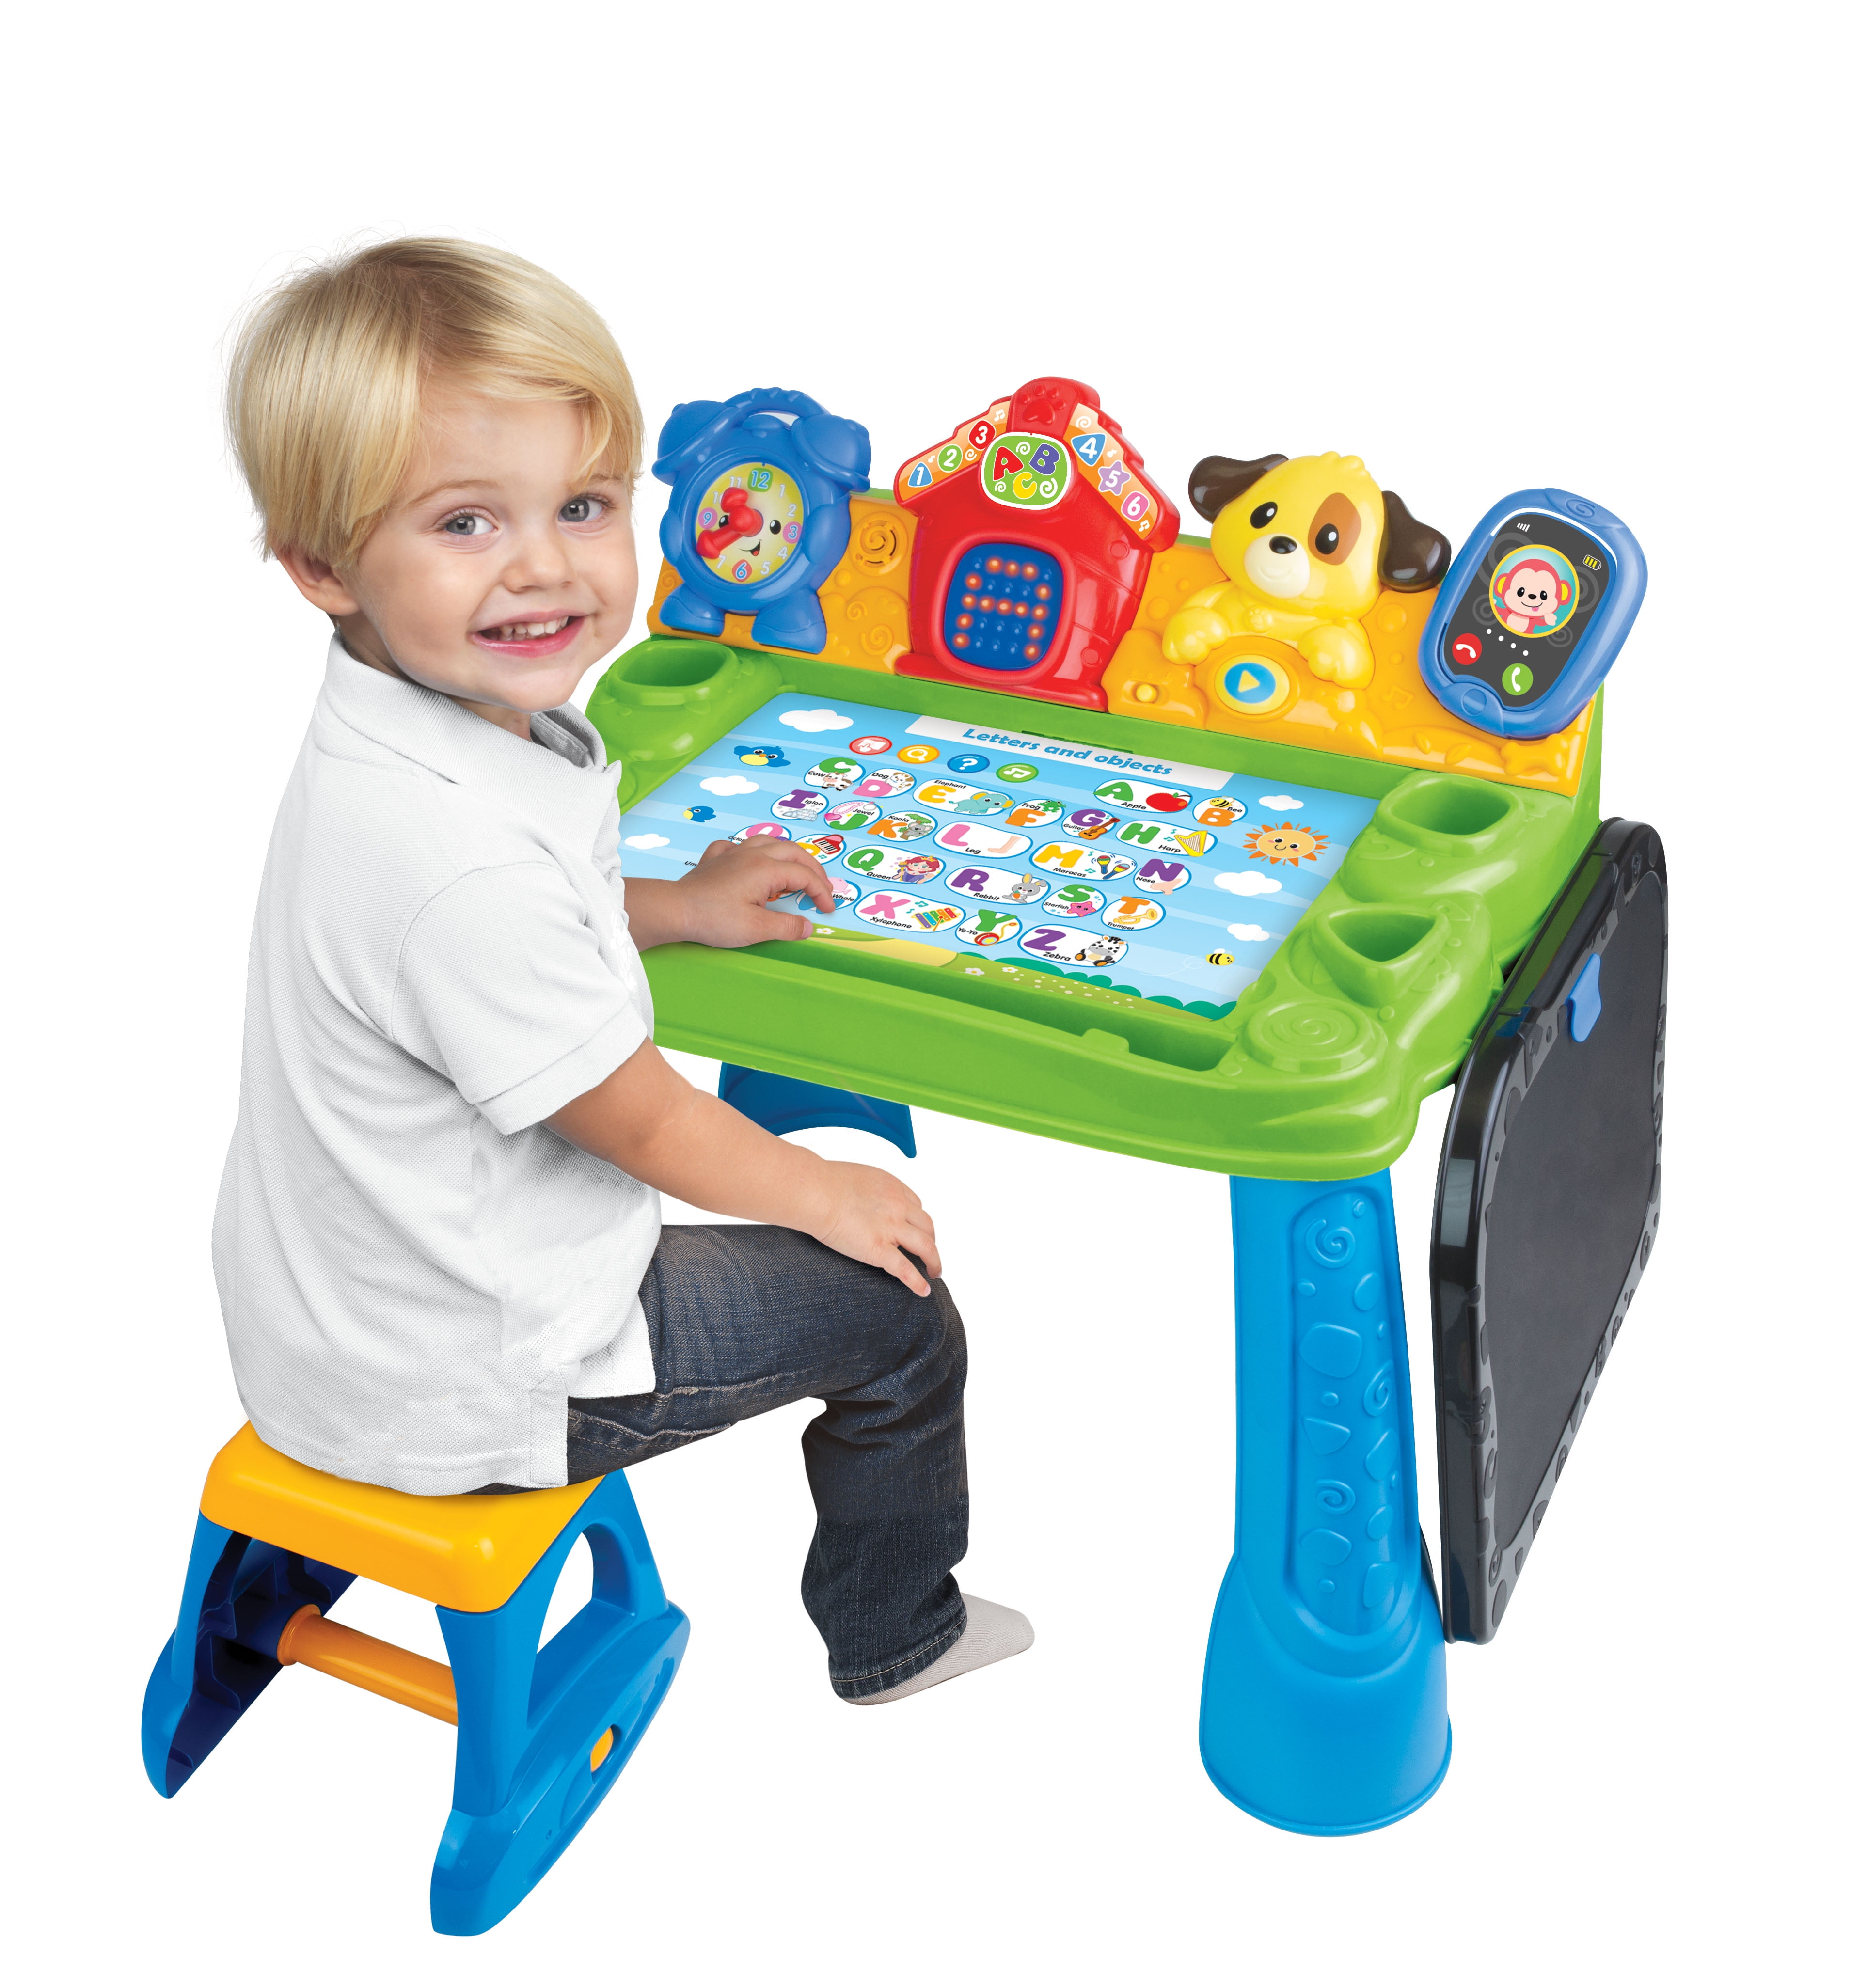 Add Fun To Your Desk! 🥳 A fun and interactive toy with real